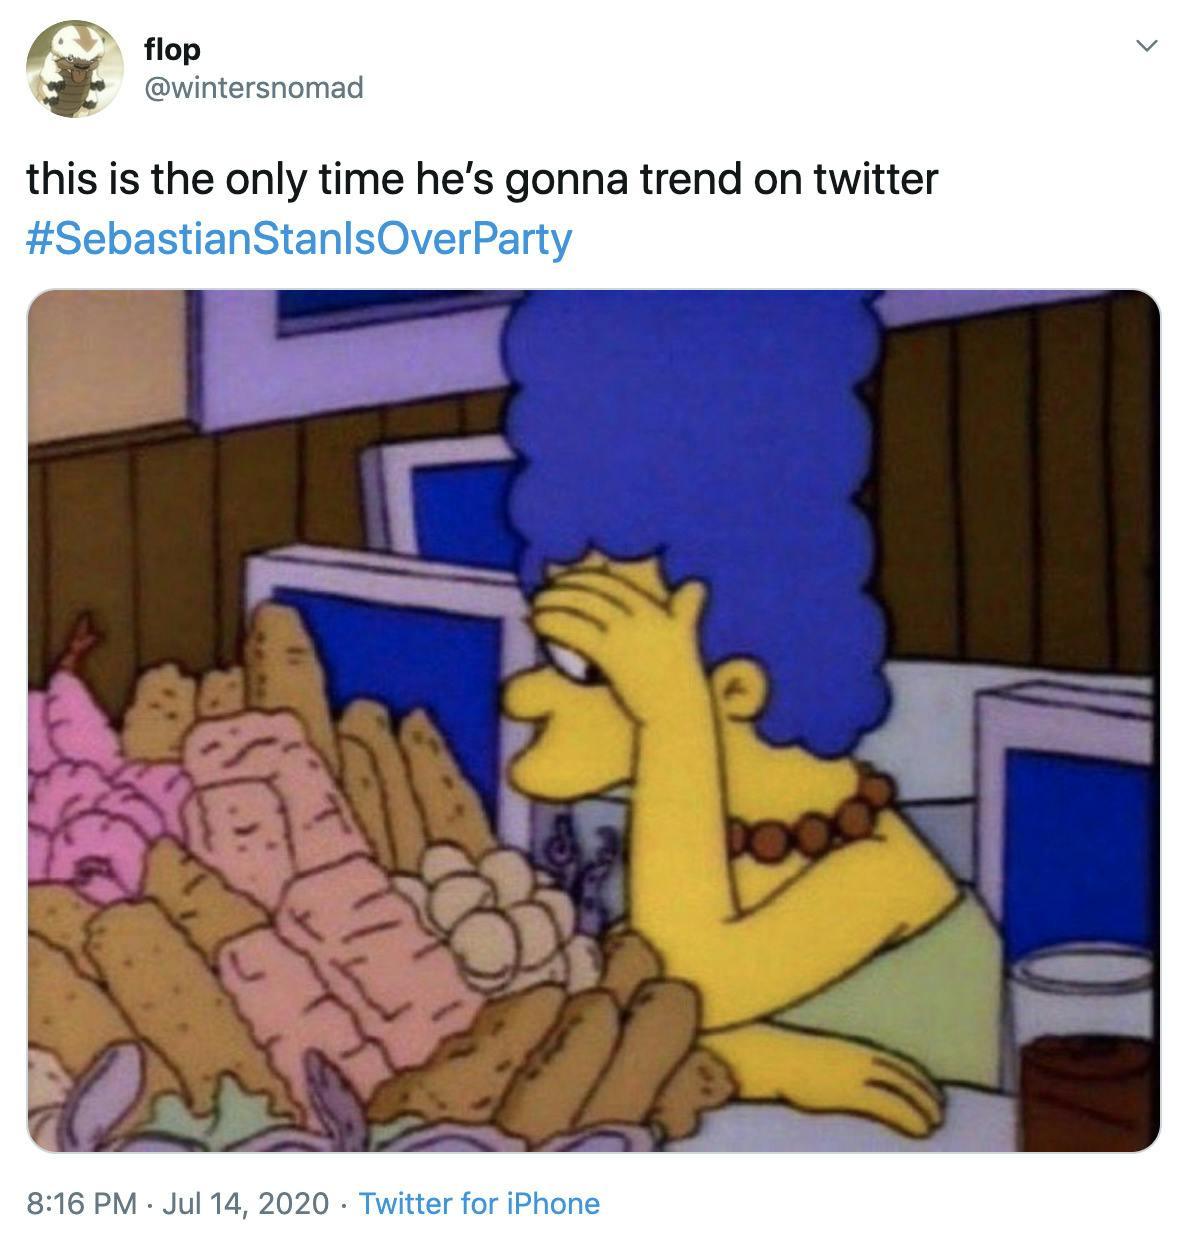 "this is the only time he’s gonna trend on twitter " gif of Marge Simpson covering her eyes in front of a pile of potatoes